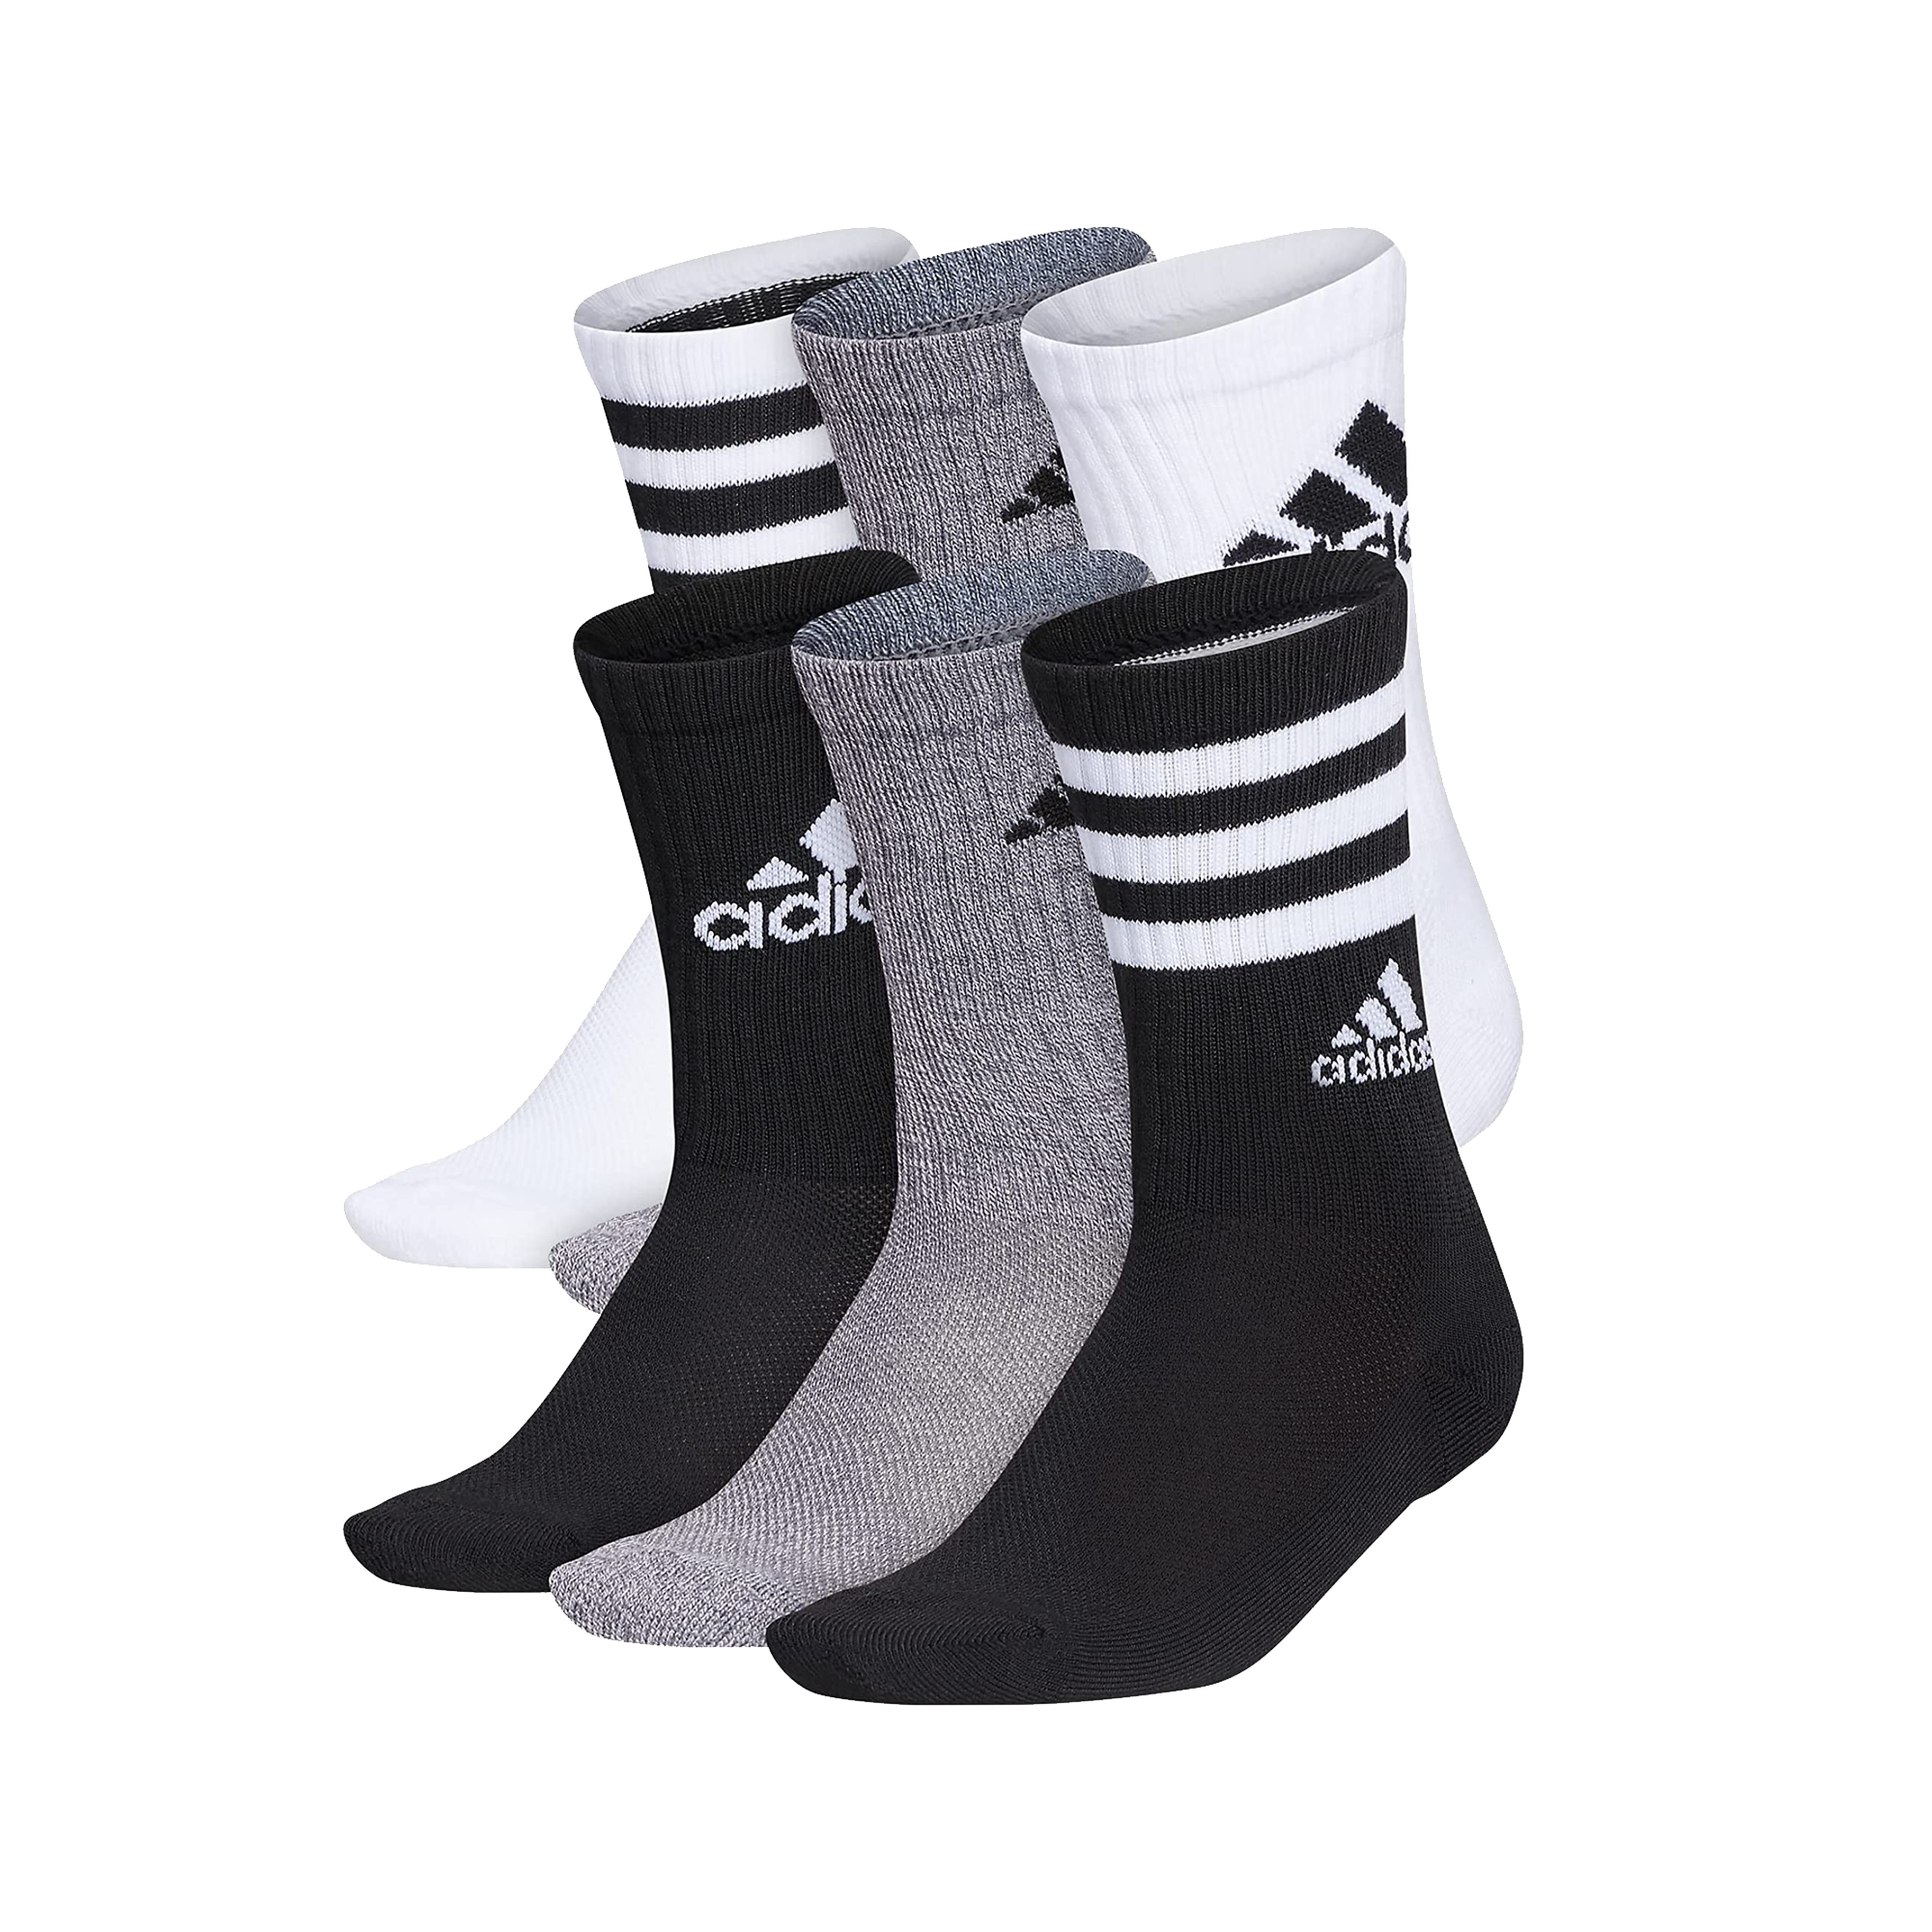 Stefans Soccer - Wisconsin - adidas adi Youth Cushioned Mixed 6-Pack Crew  Socks - White / Grey / Black